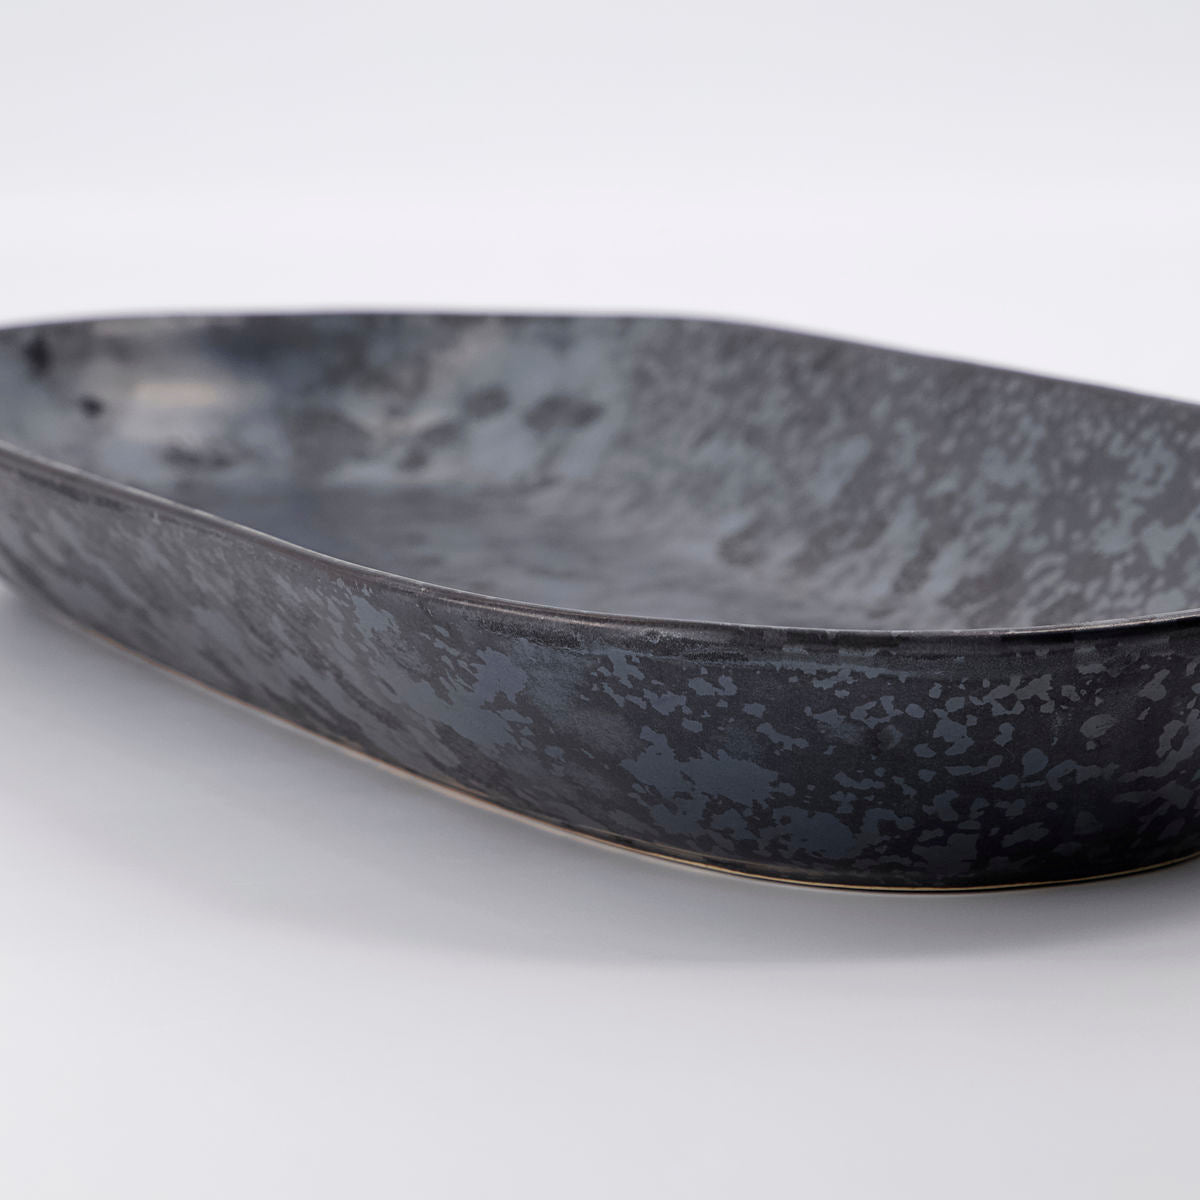 Serving dish, Pion House Doctor